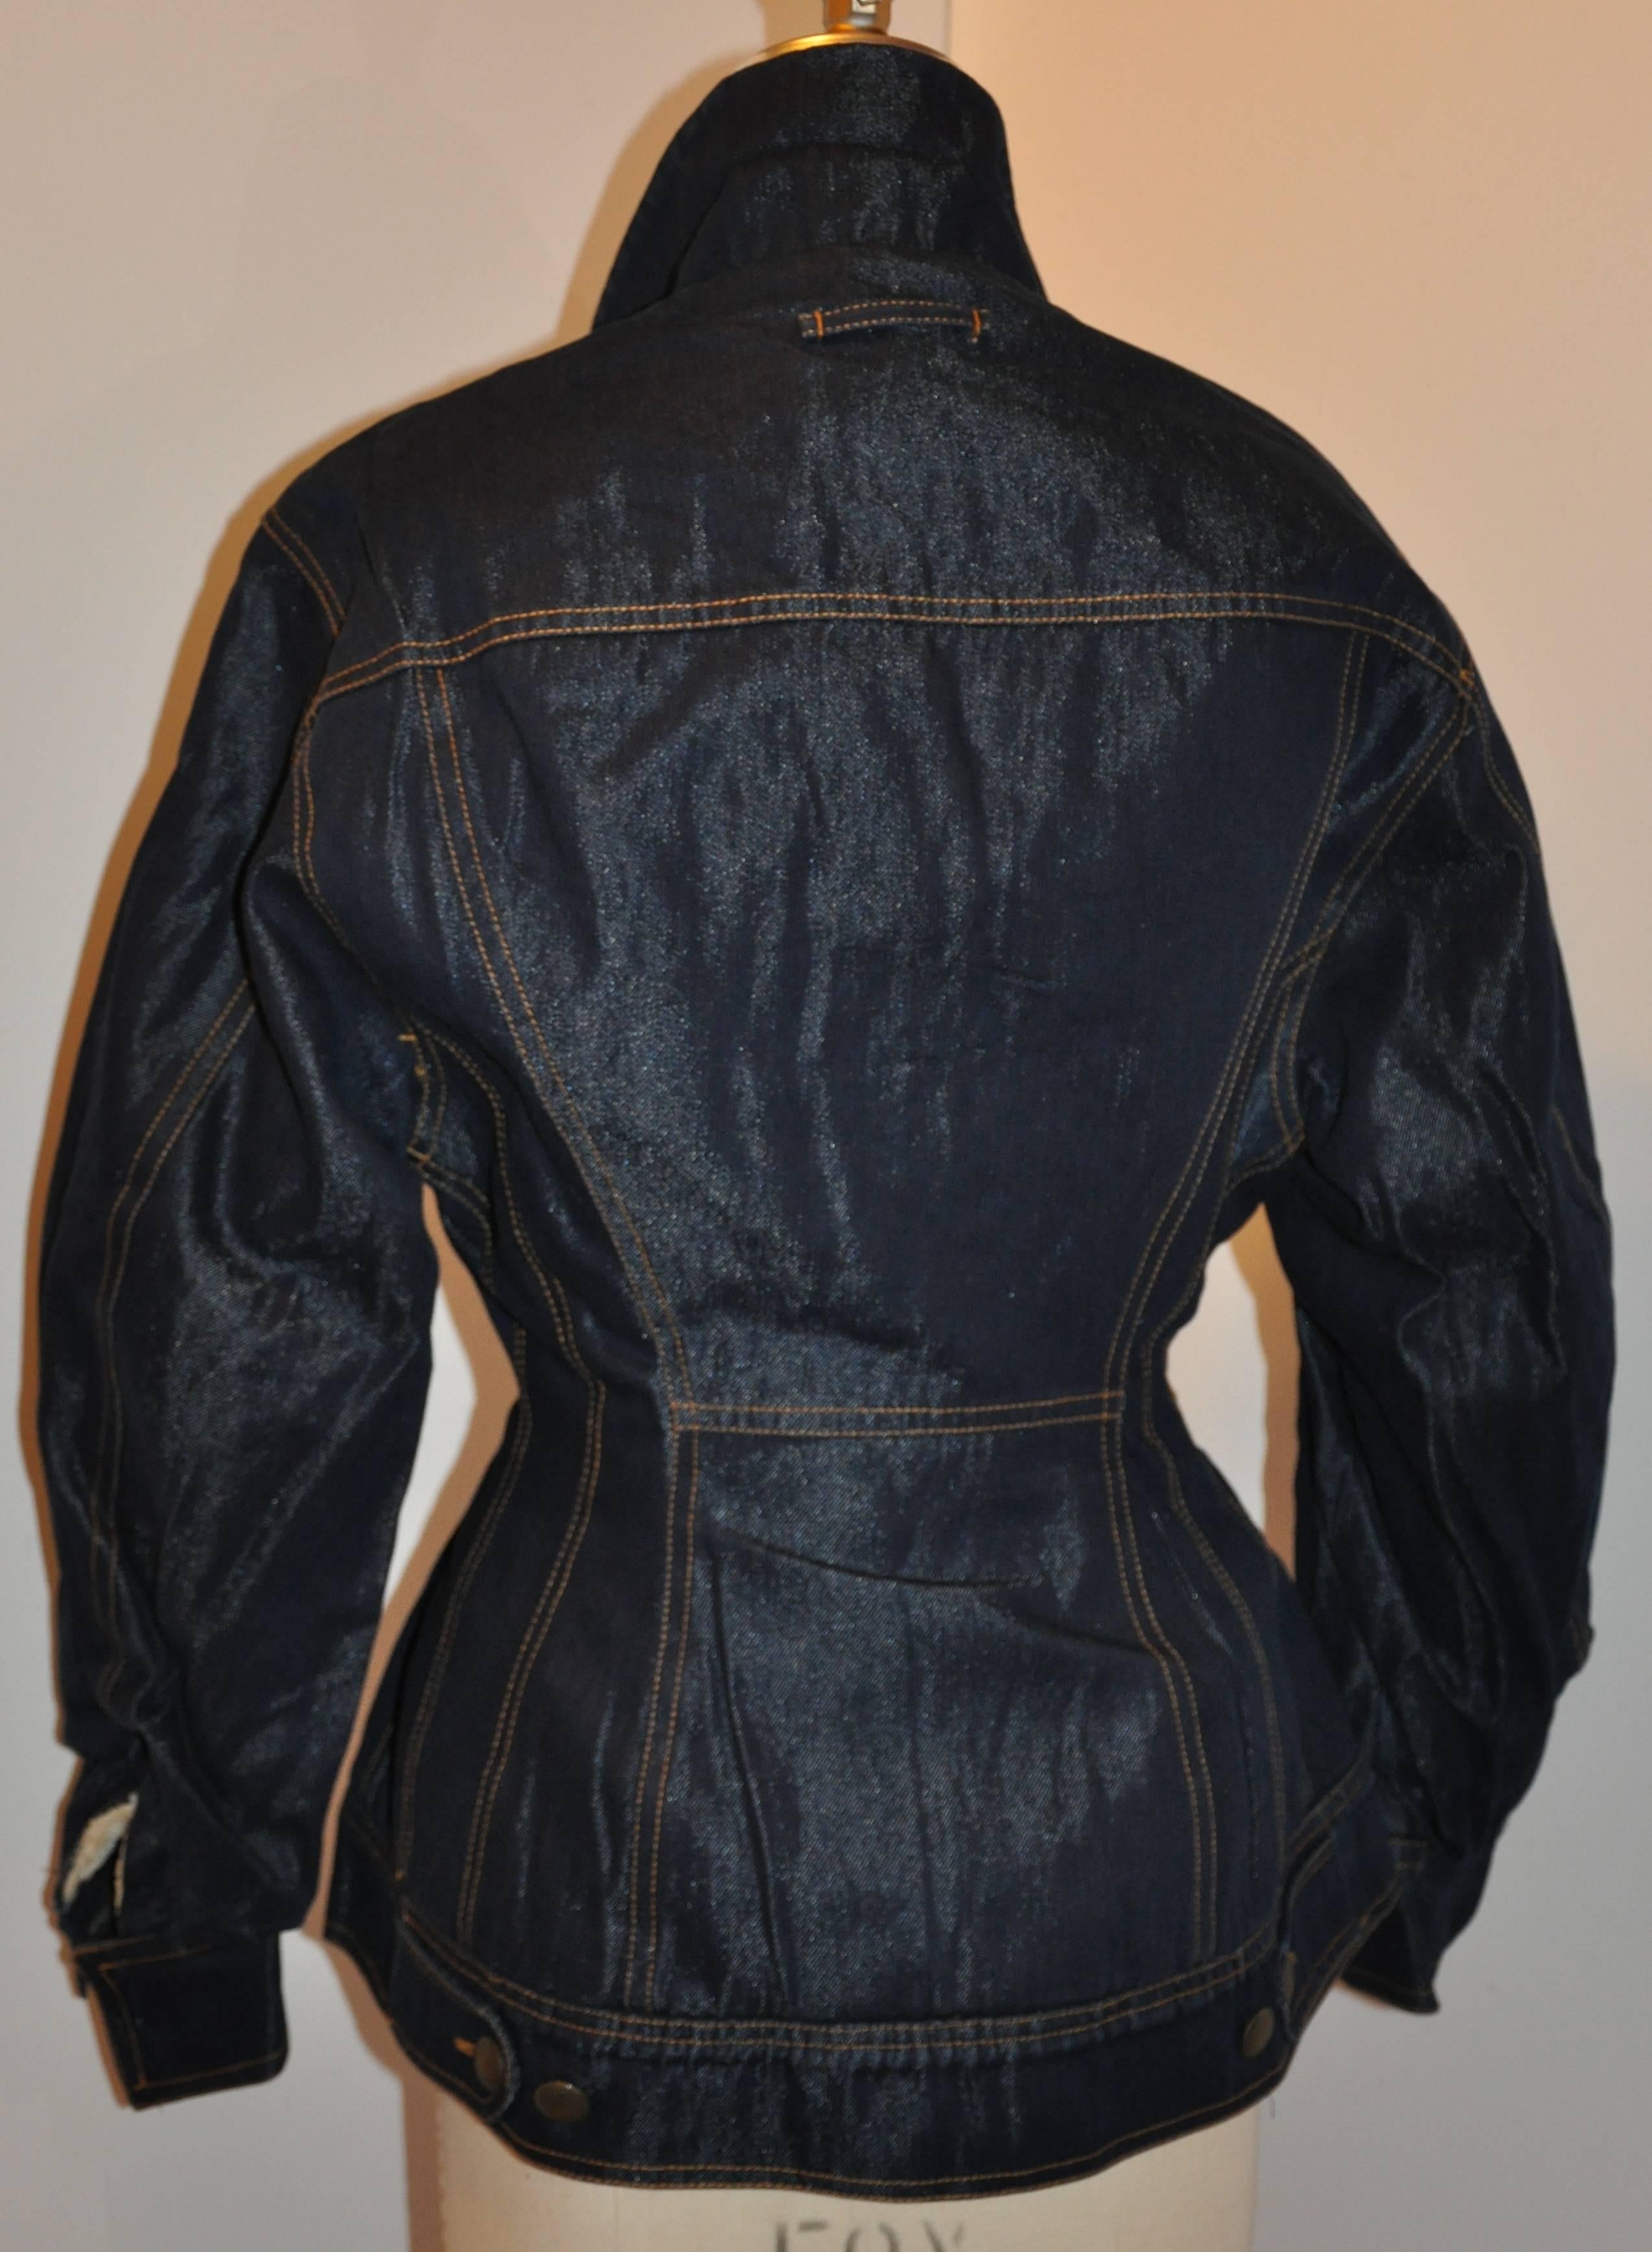      Rare Jean Paul Gaultier sculpted denim jacket with faux leopard collar button jacket is detailed with  double-stitching. The front has two set-in breast pockets with the interior lined with soft faux shearing for extra warmth for those cozy